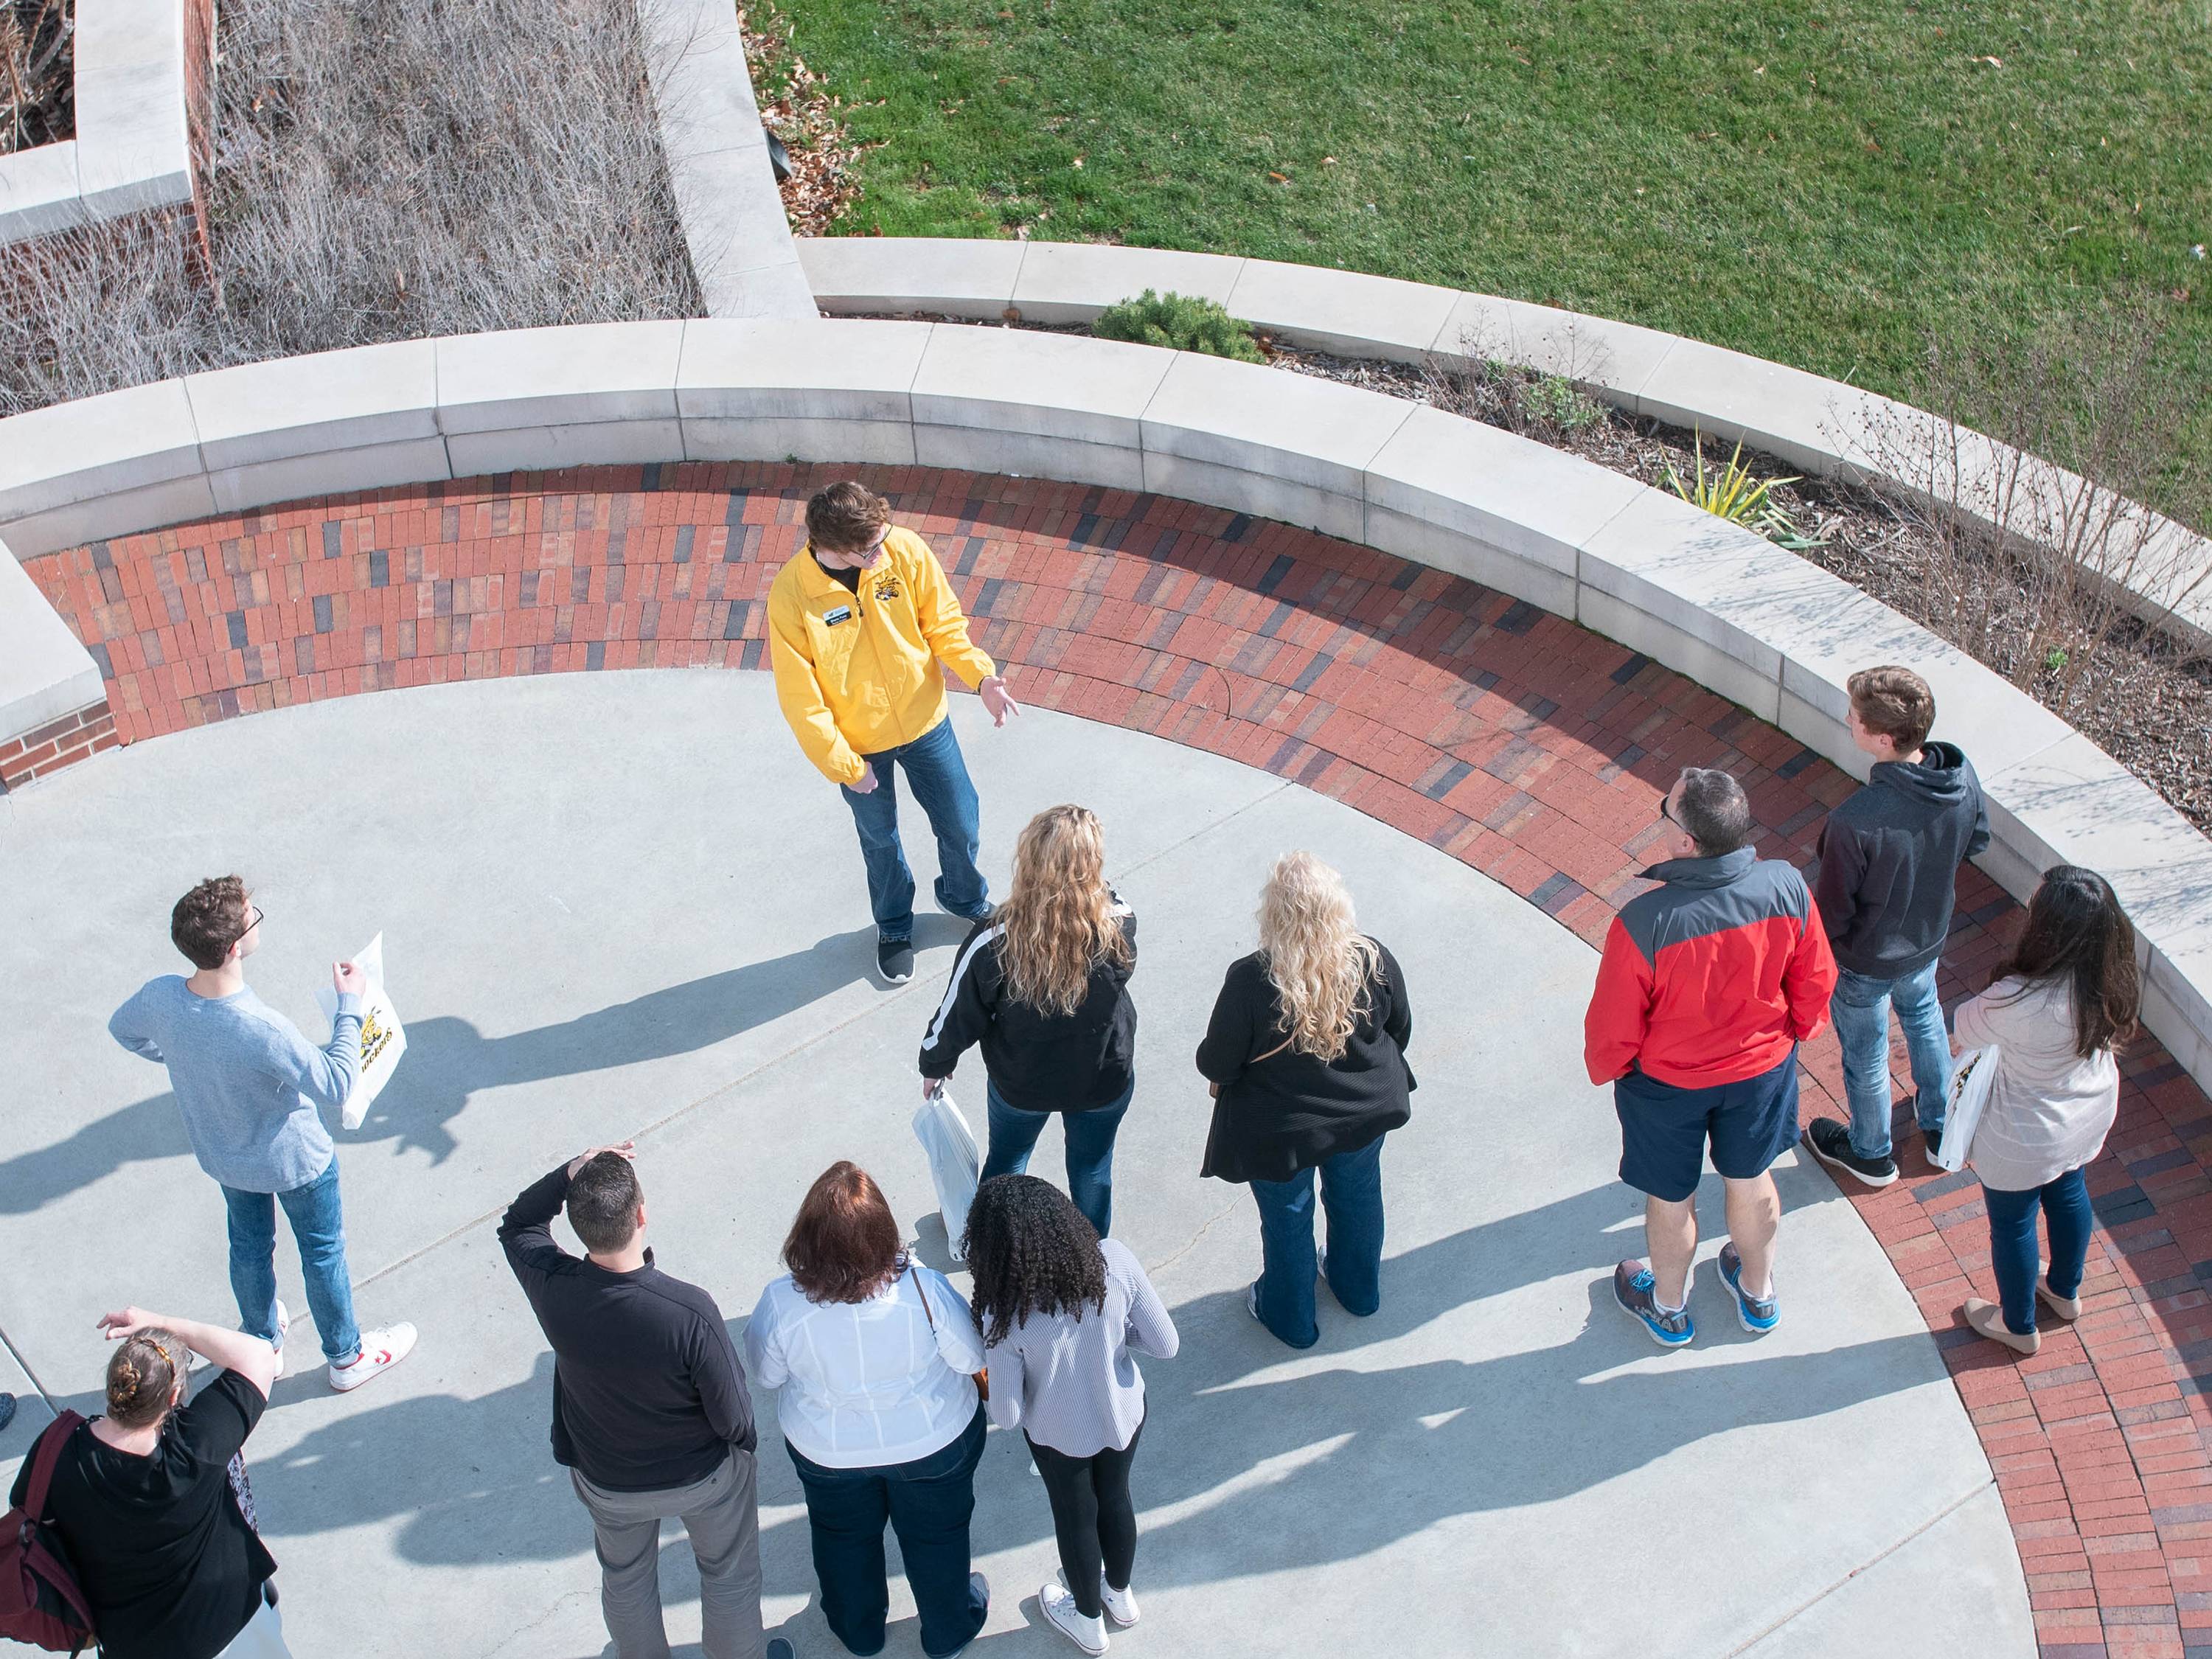 Tour group as seen from overhead, outside the Rhatigan Student Center